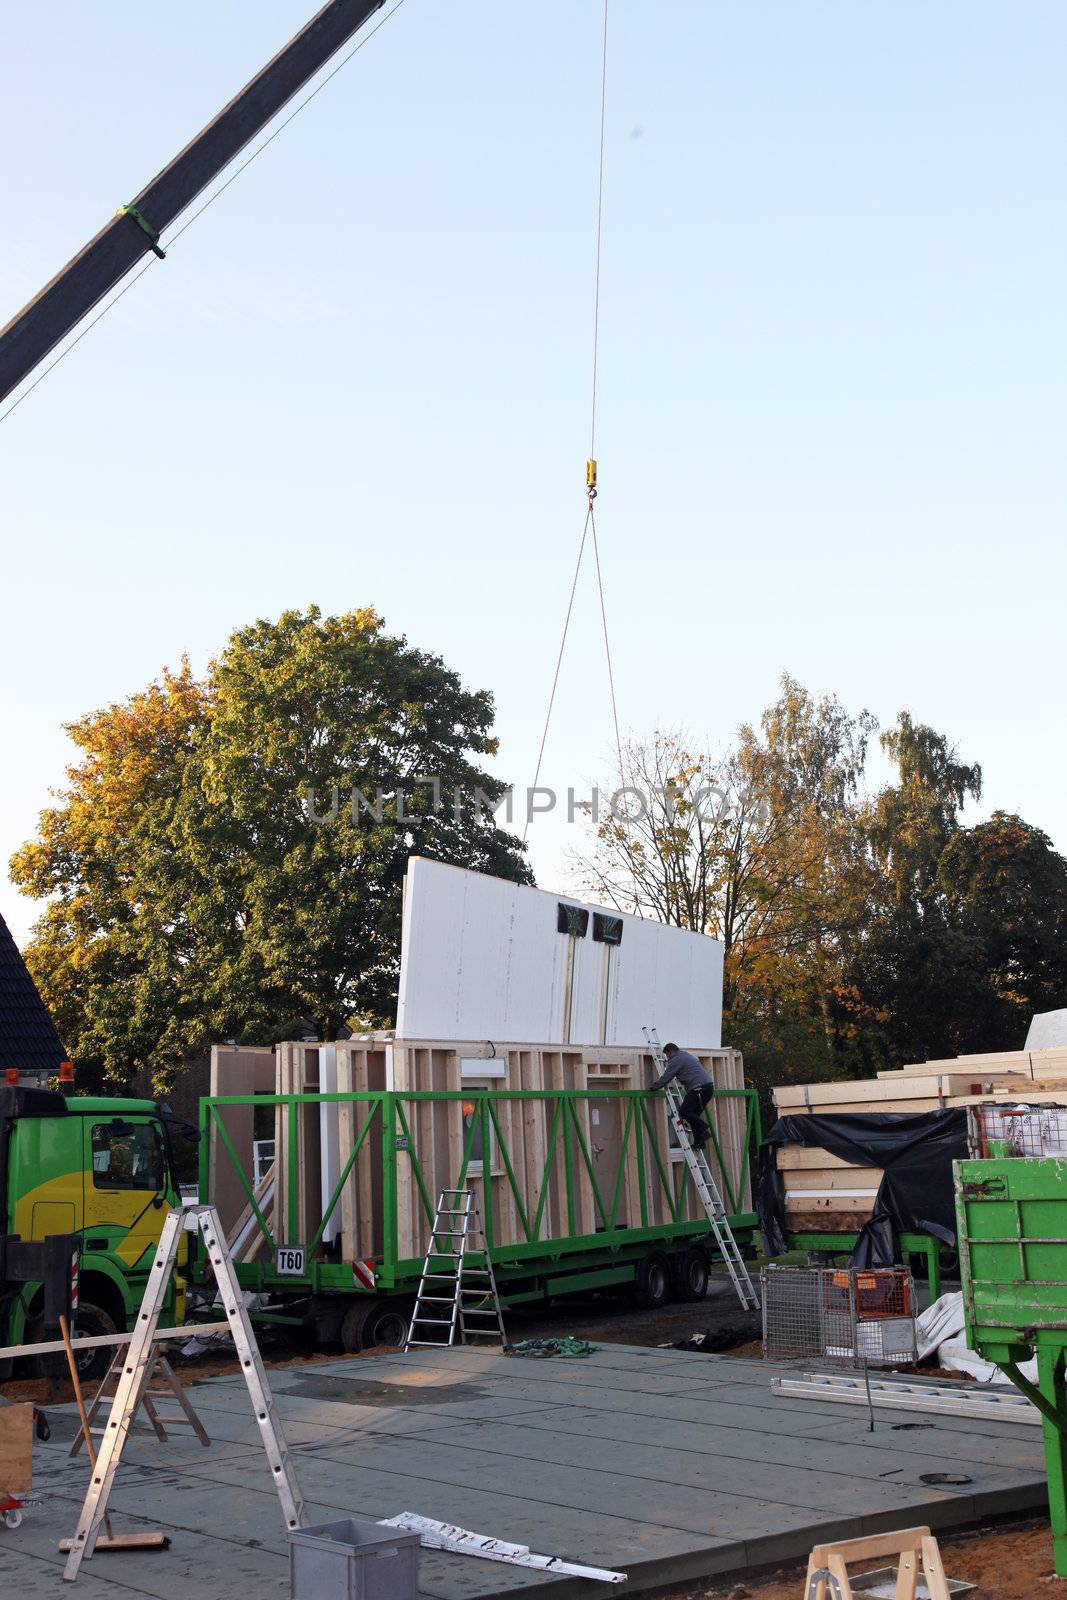 Crane lifting a section of a prefabricated house by Farina6000